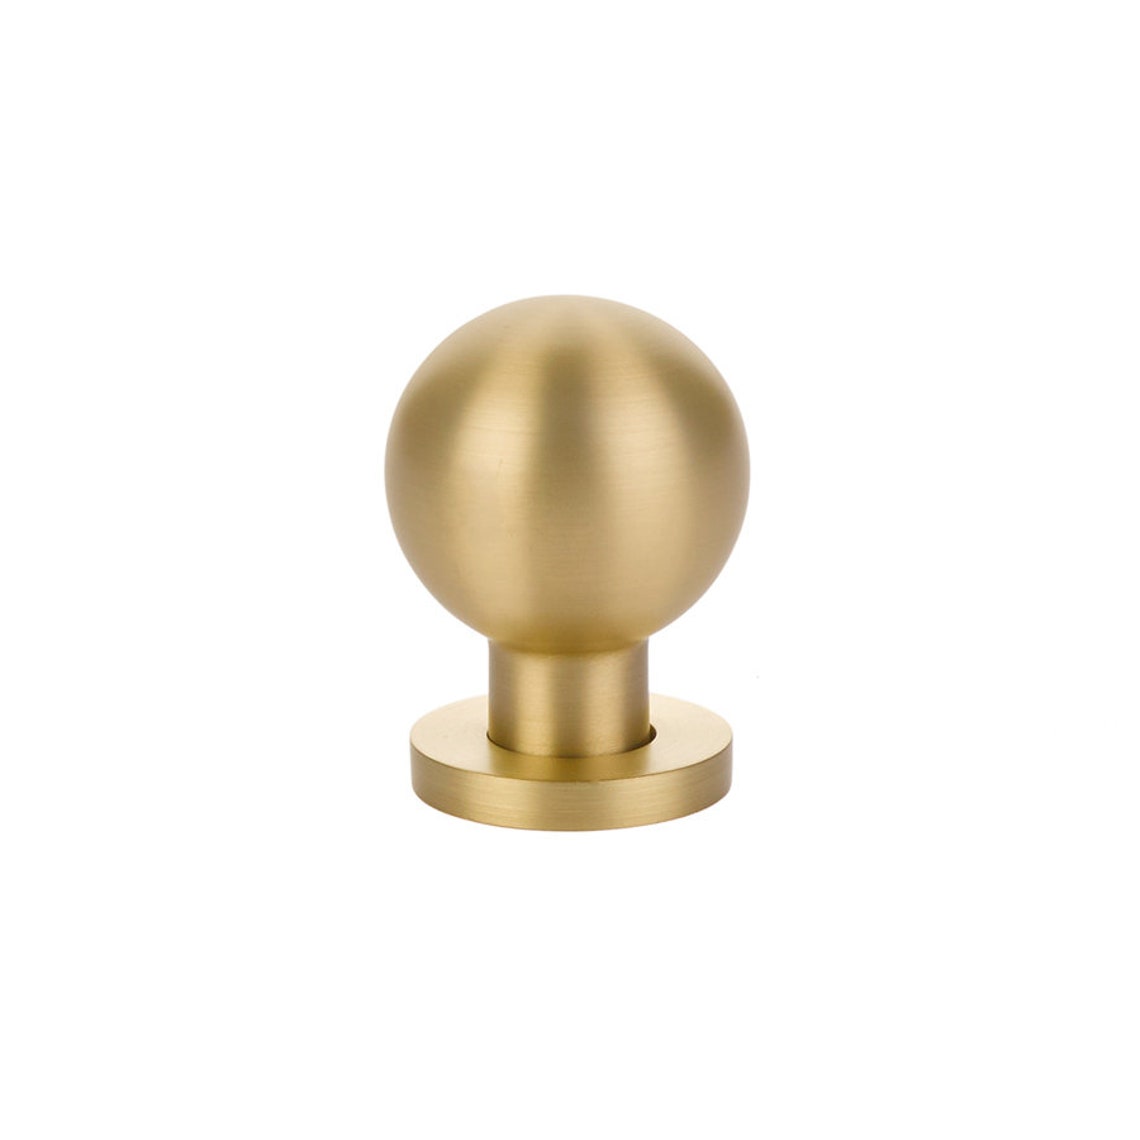 Omni Cabinet Knobs and Drawer Pulls in Satin Brass - Industry Hardware